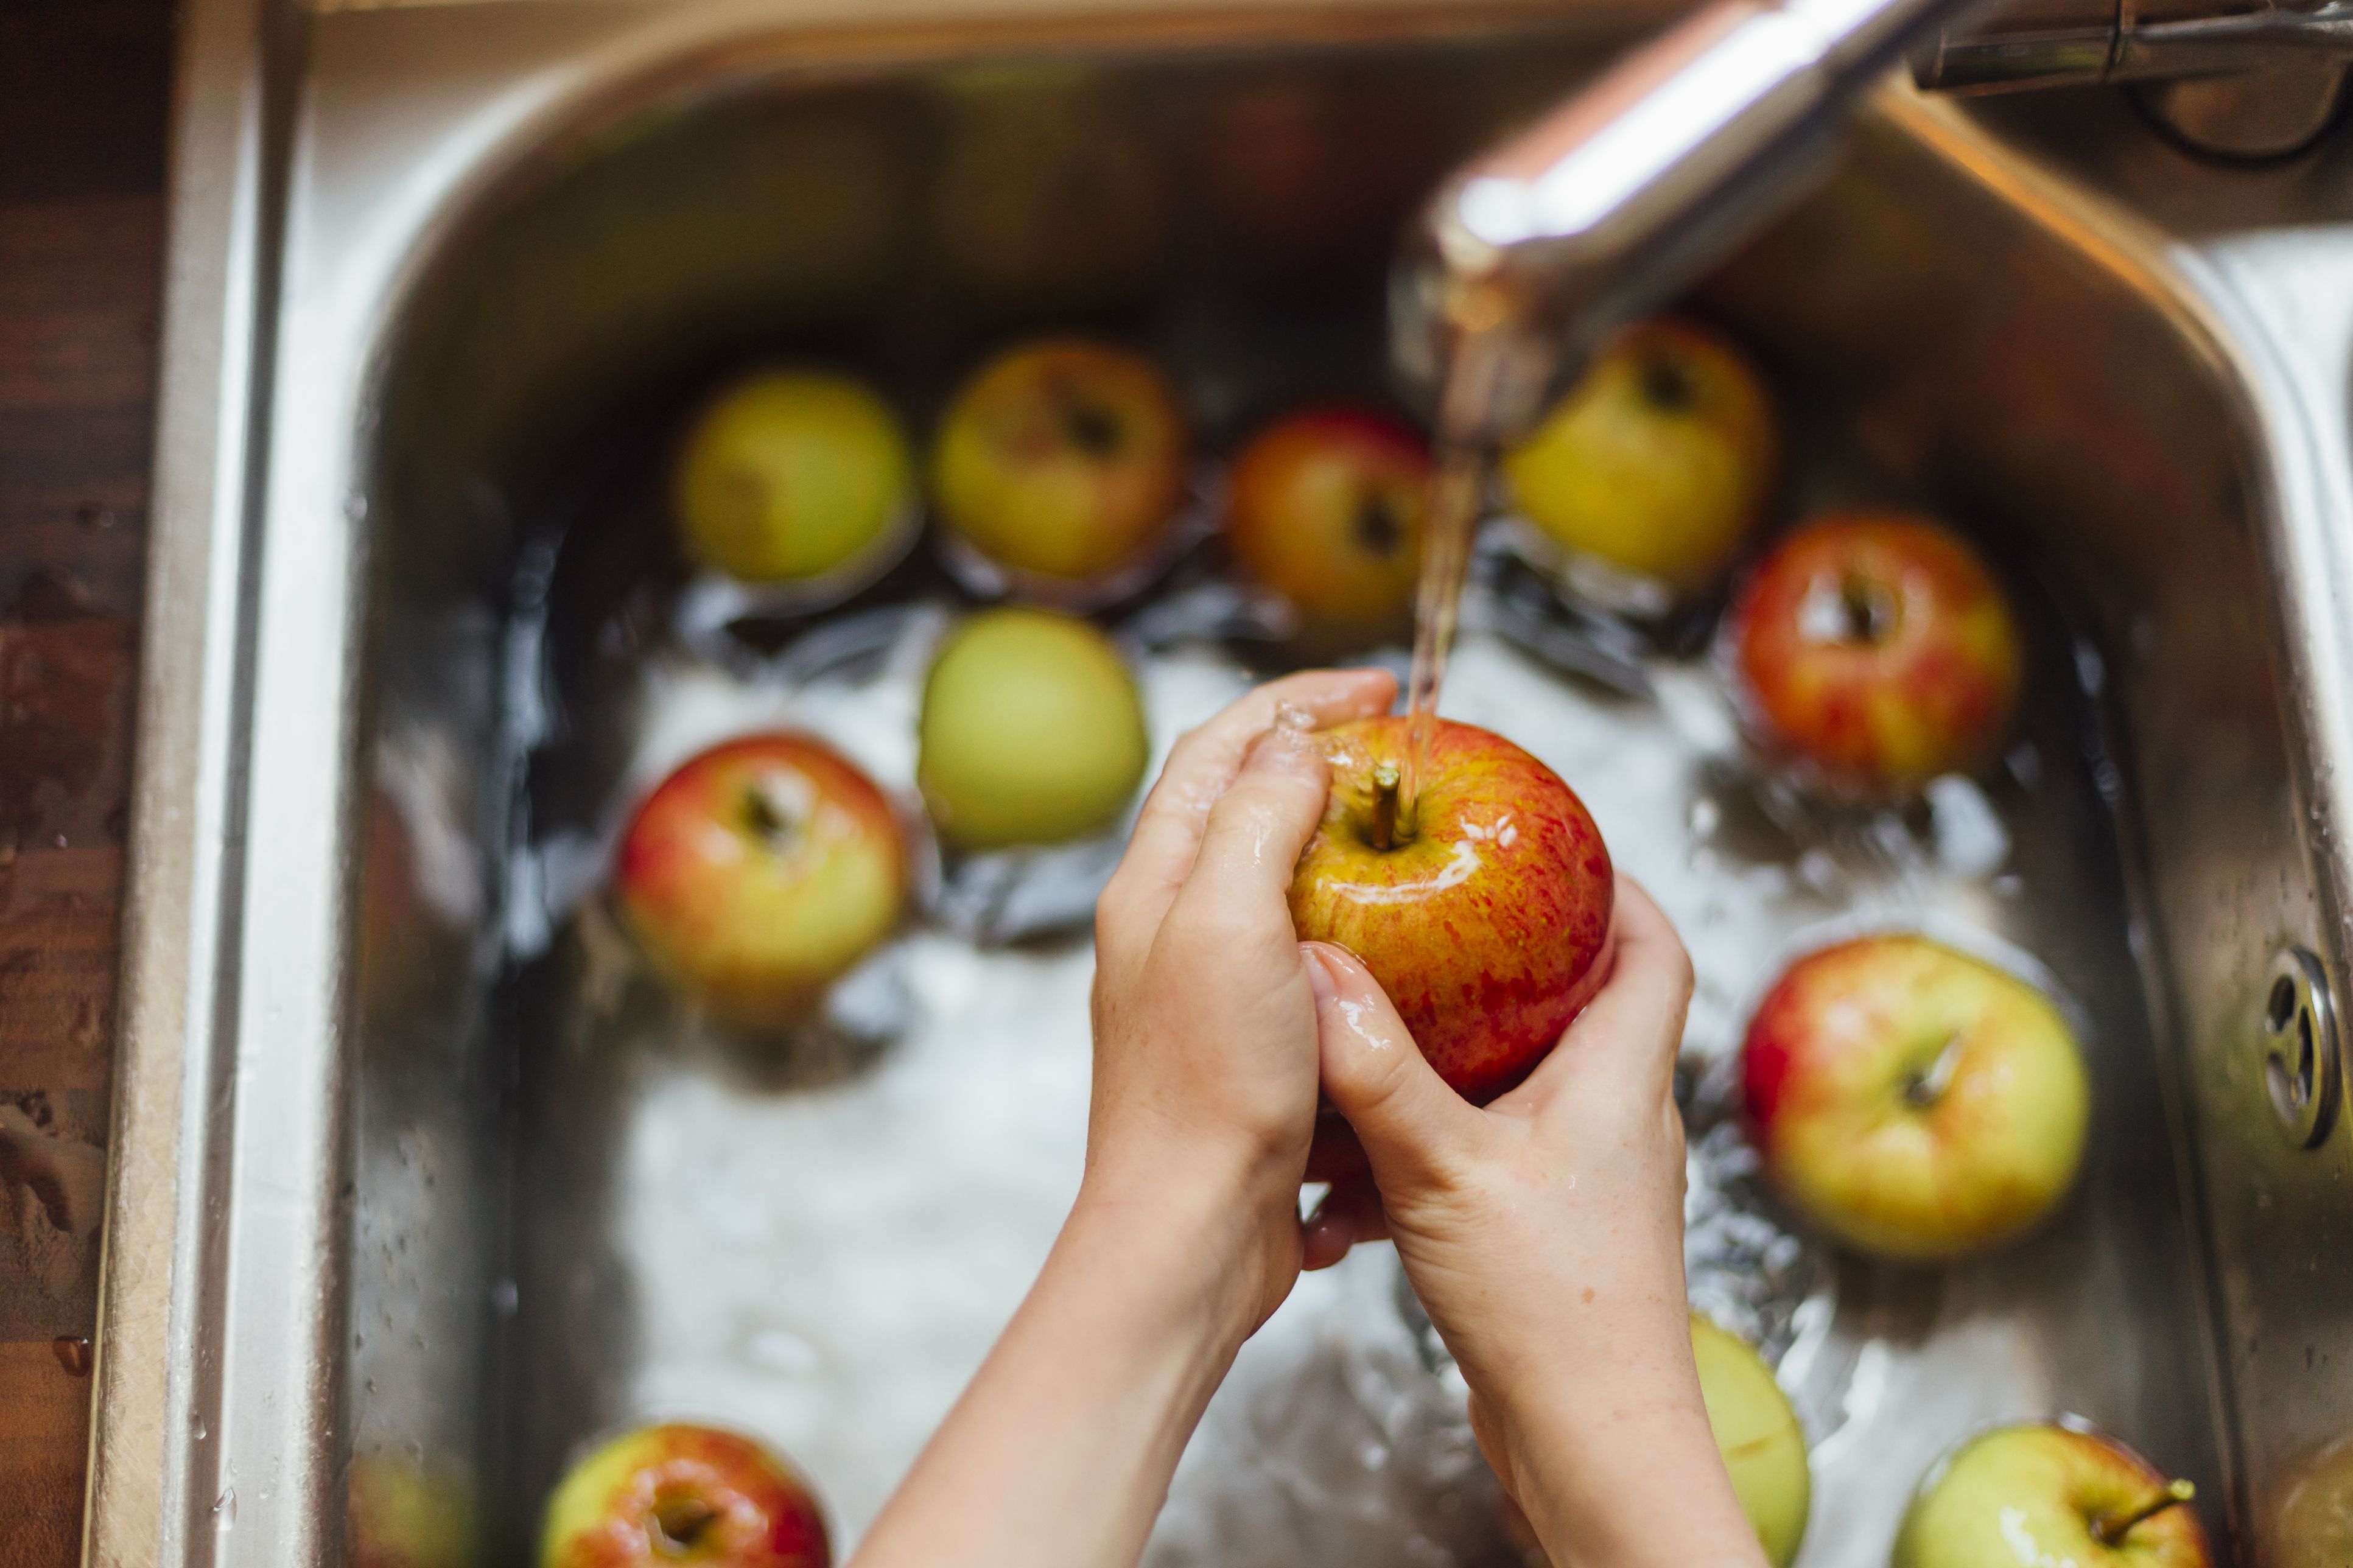 What's the right way to wash fruits and vegetables